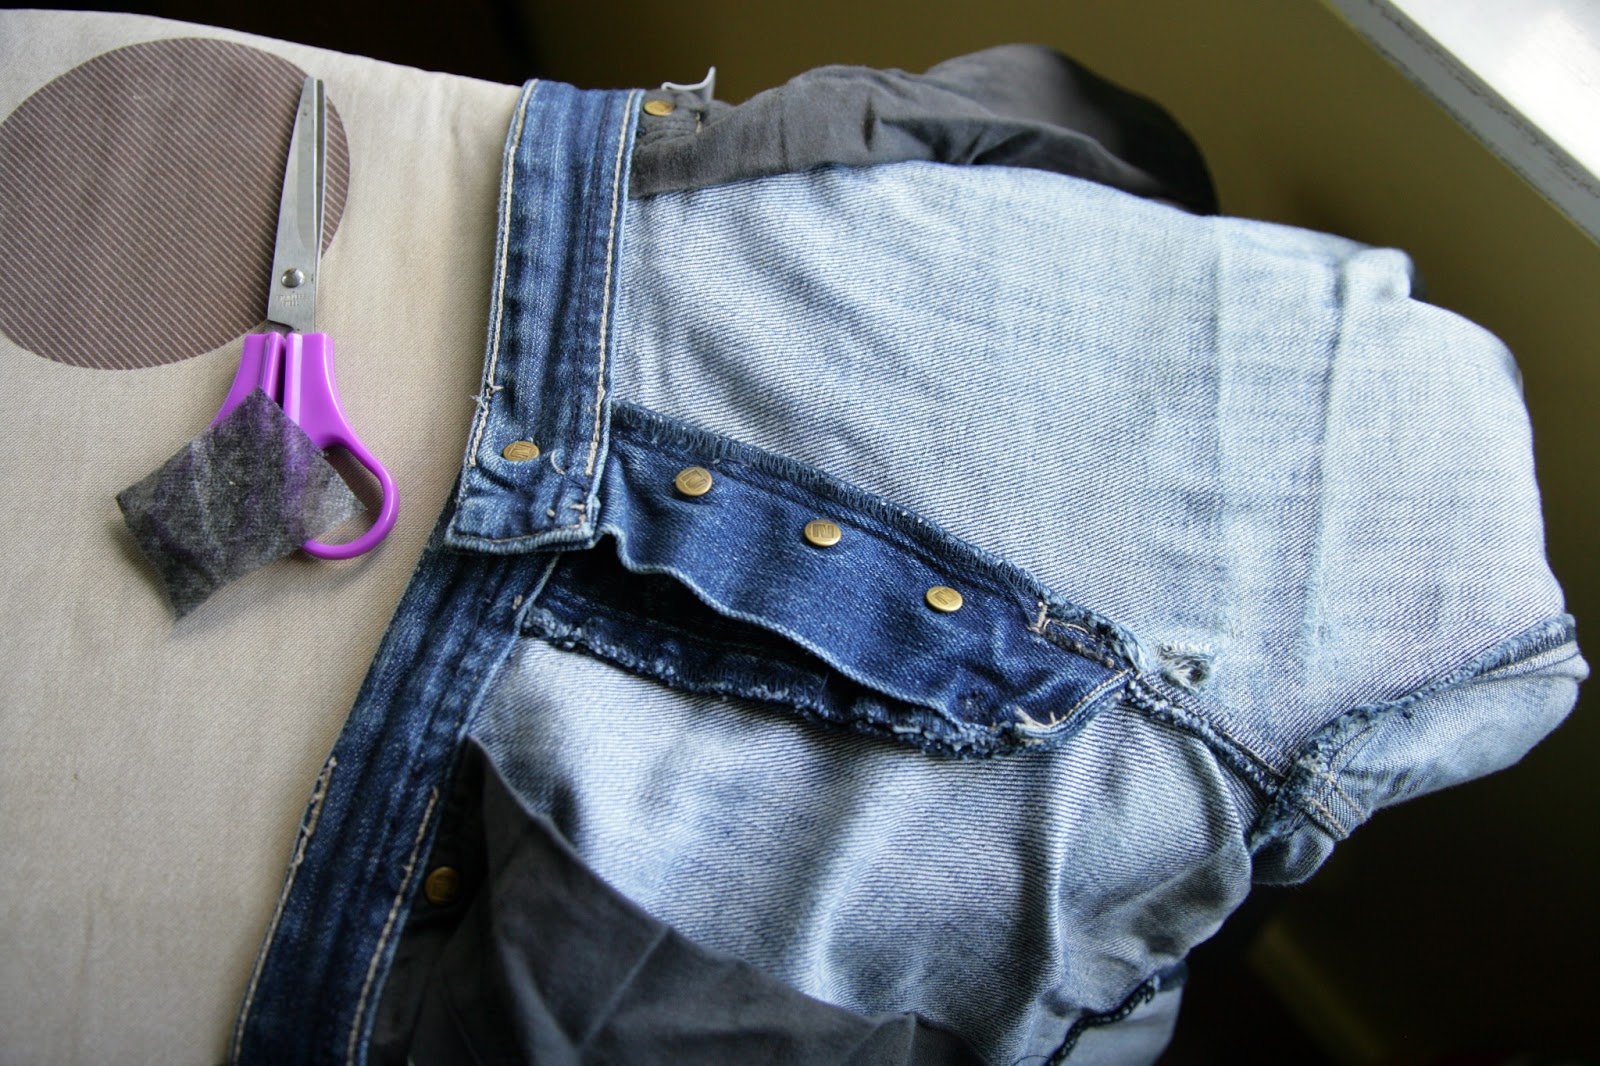 Big Adventure: Tutorial - Repair Jeans with Ripped Crotch